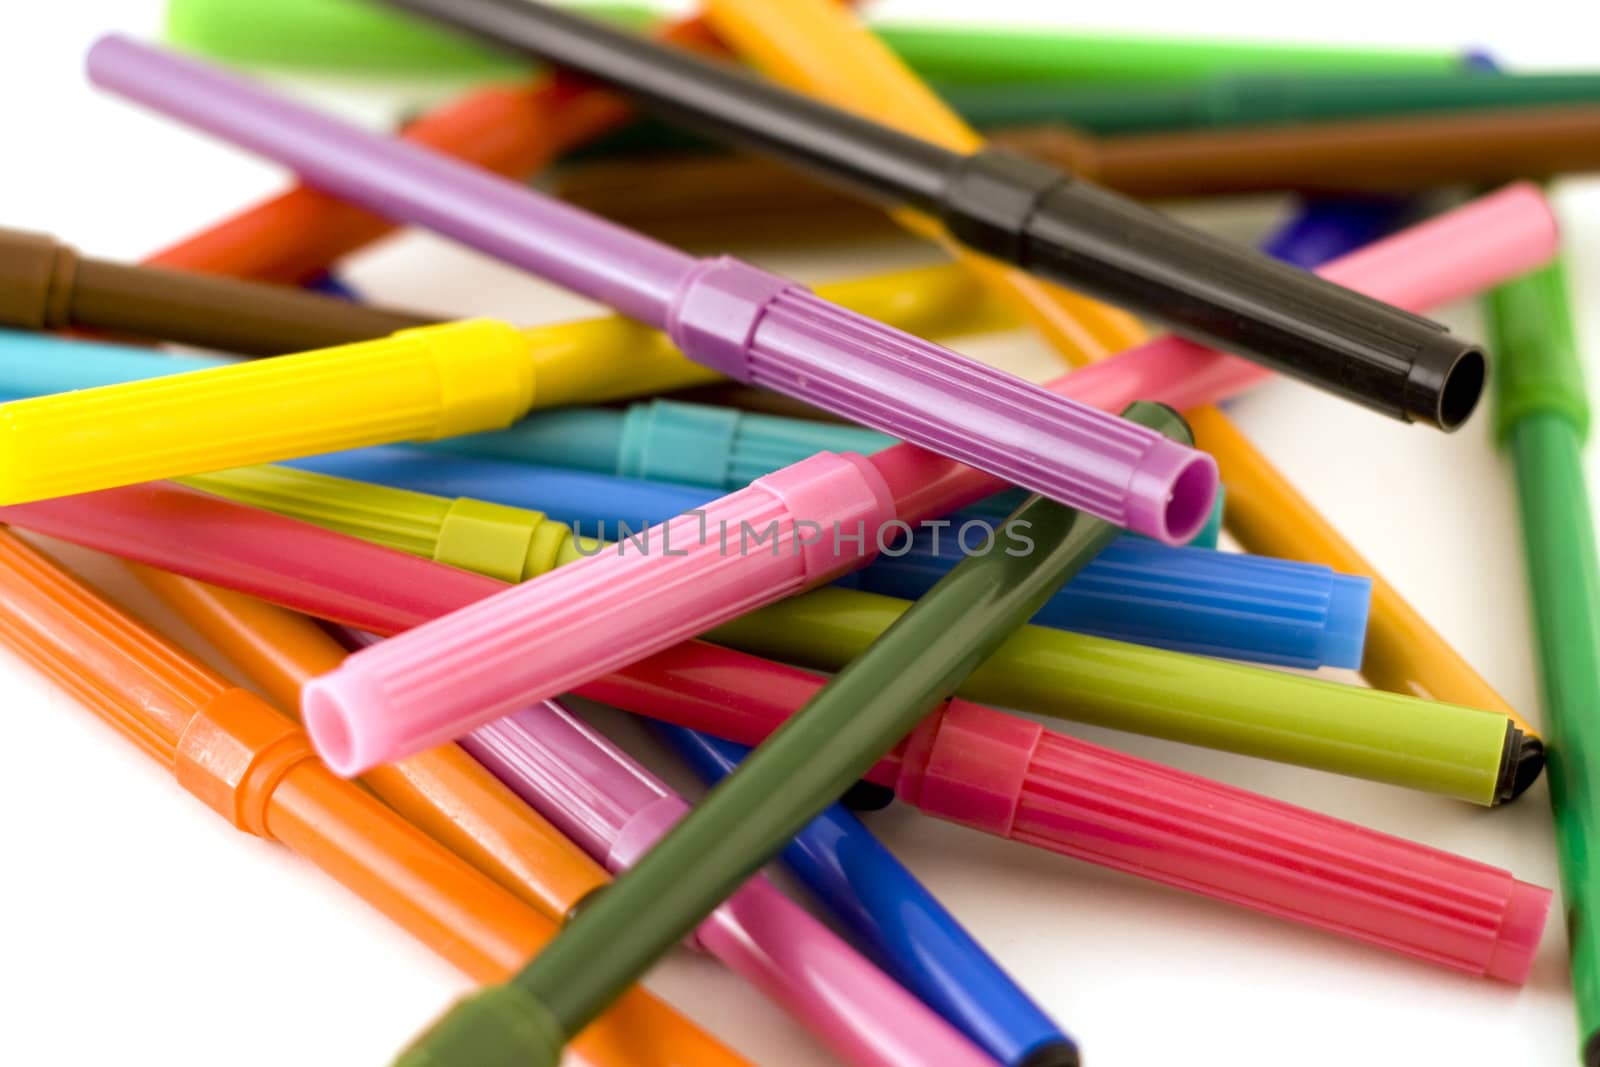 Pile of colorful markers on white background with shallow dof